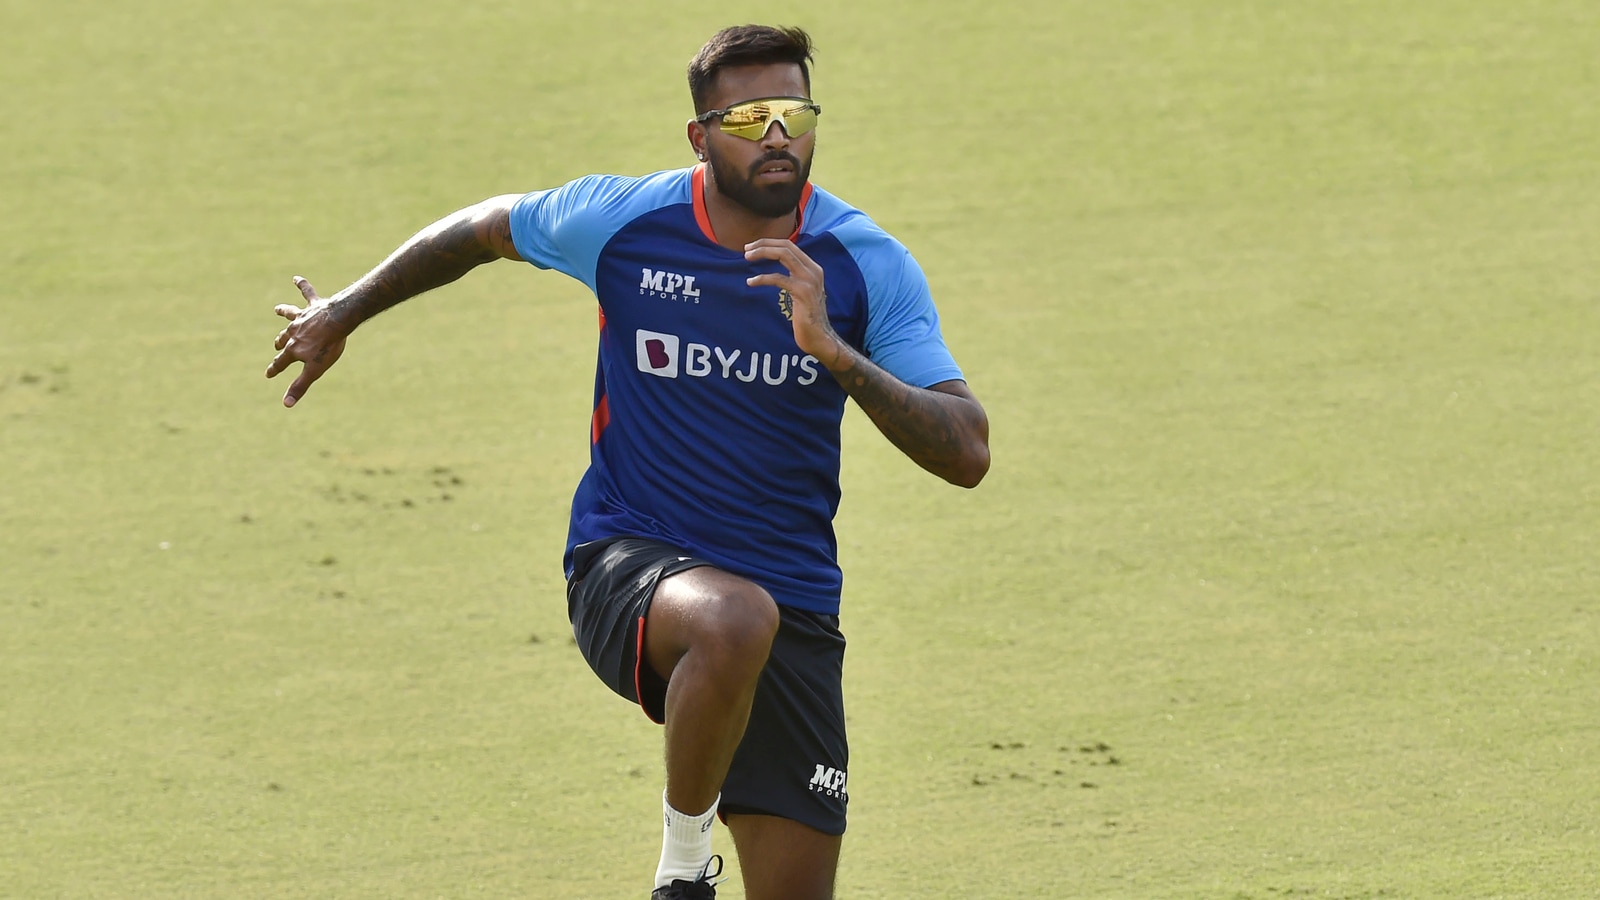 hardik-pandya-has-got-to-mature-more-former-england-all-rounder-on-how-india-star-can-become-a-top-player